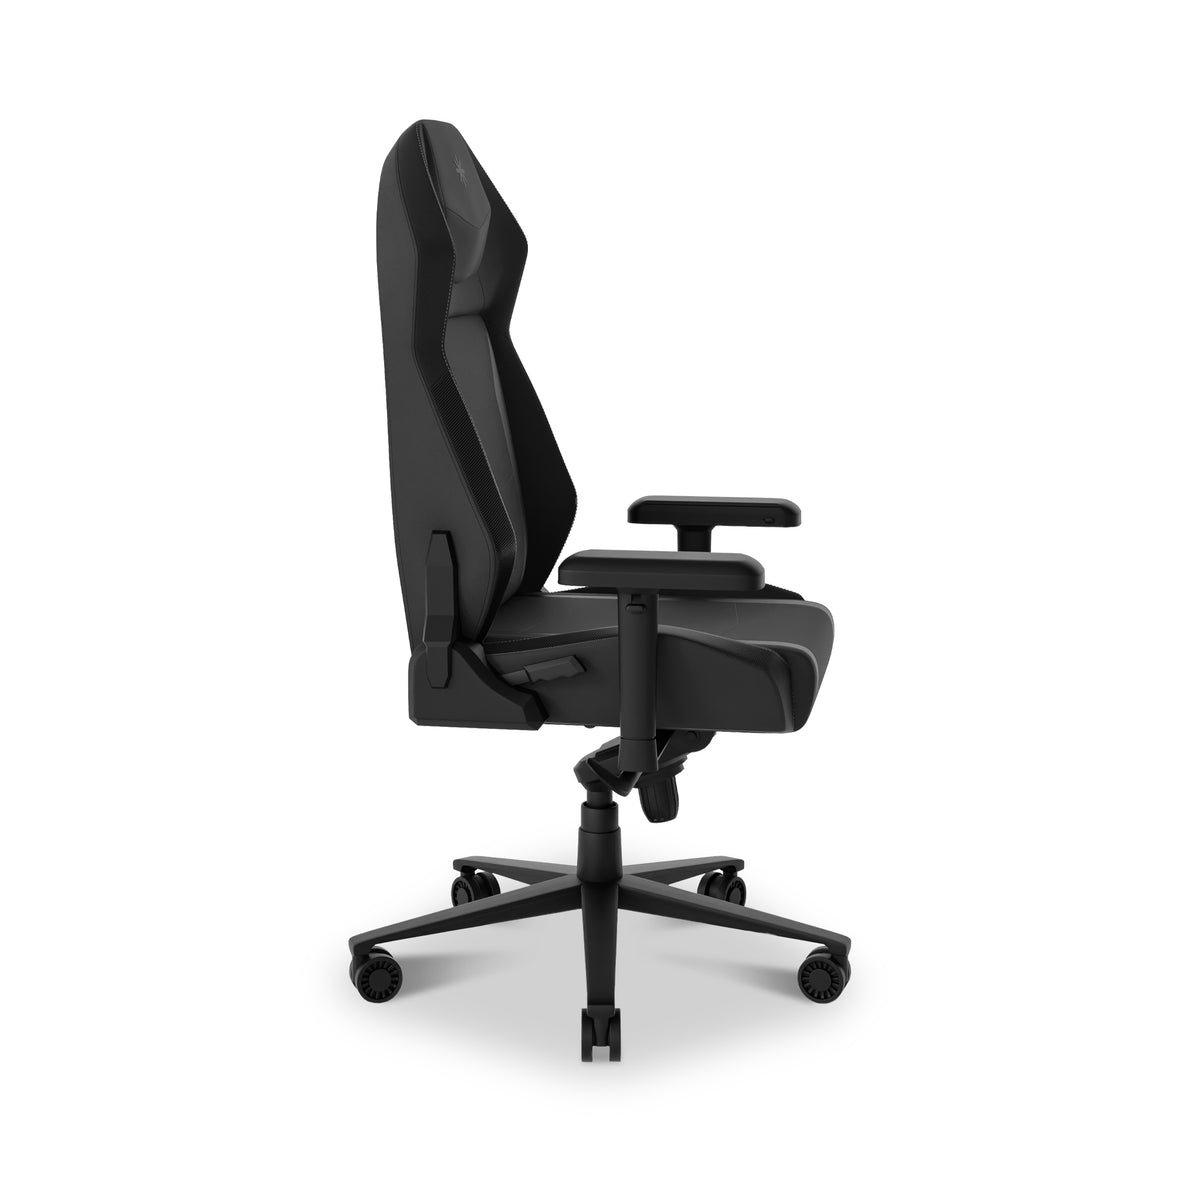 Koble Vortex Gaming Chair with Grey Accents from Roseland